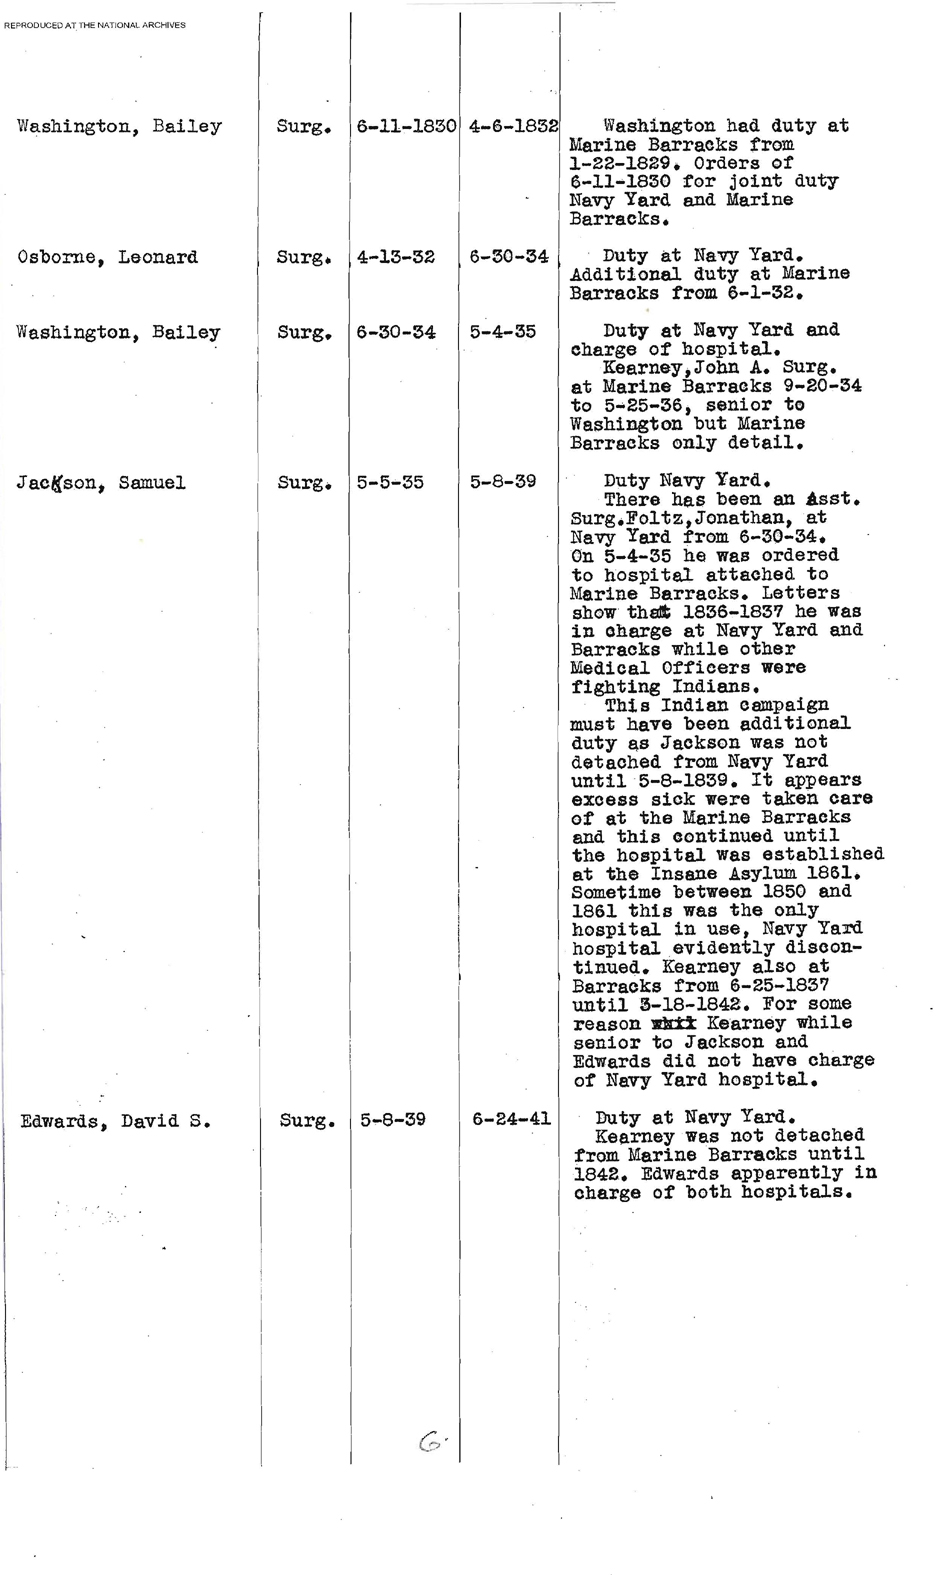 Roster of Commanding Officers of the Naval Hospital, Washington, DC, Page 6